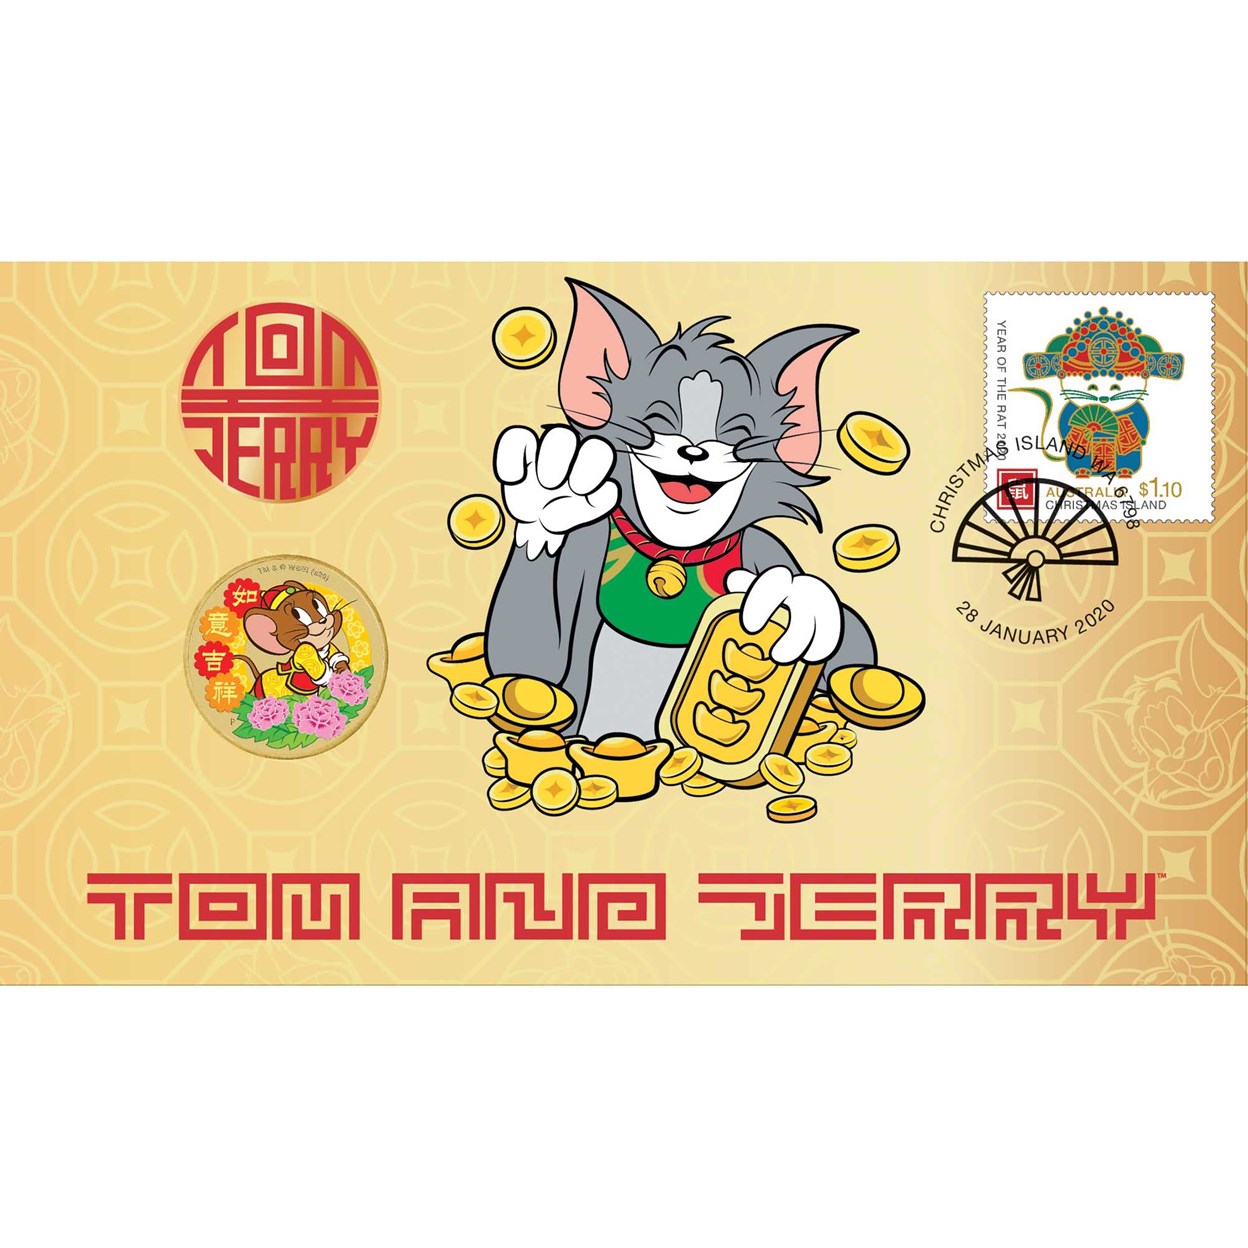 04 tom and jerry 2020 stamp and coin cover 2019 base metal PNC